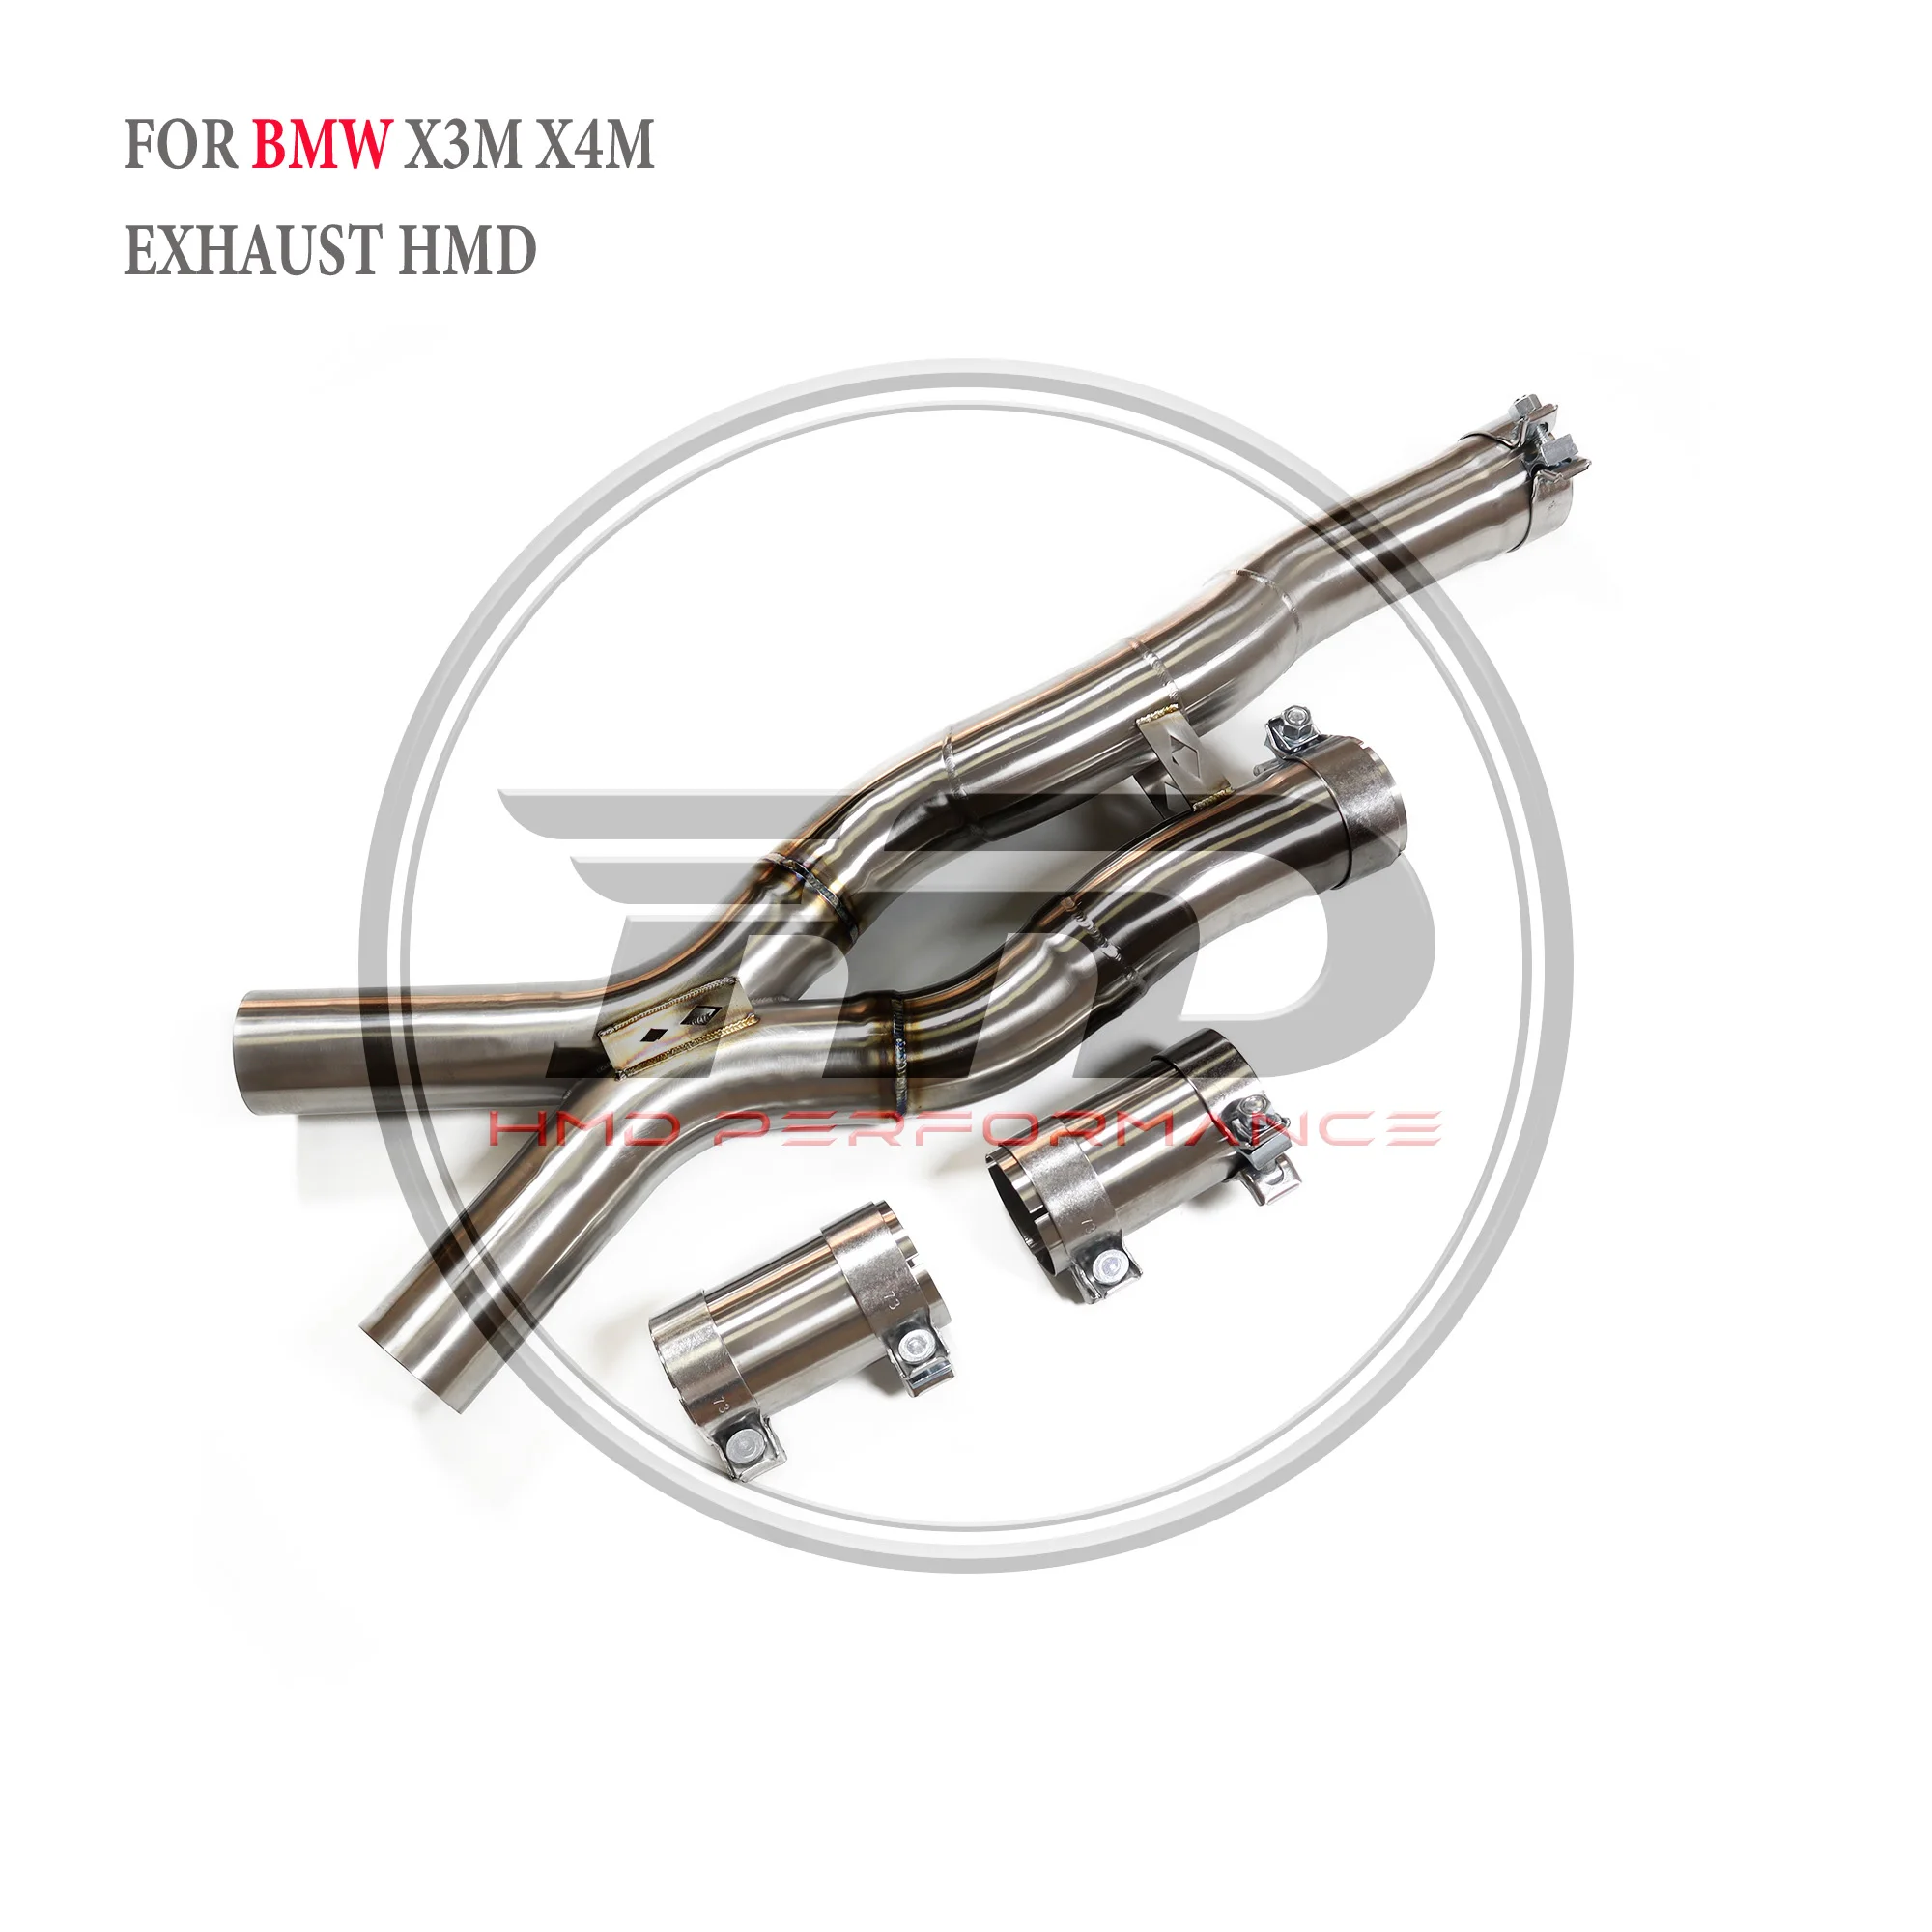 

HMD Stainless Steel Exhaust System Middle Pipe for BMW X3M X4M F97 F98 2019+ 2.75" X Tube Delete Resonator